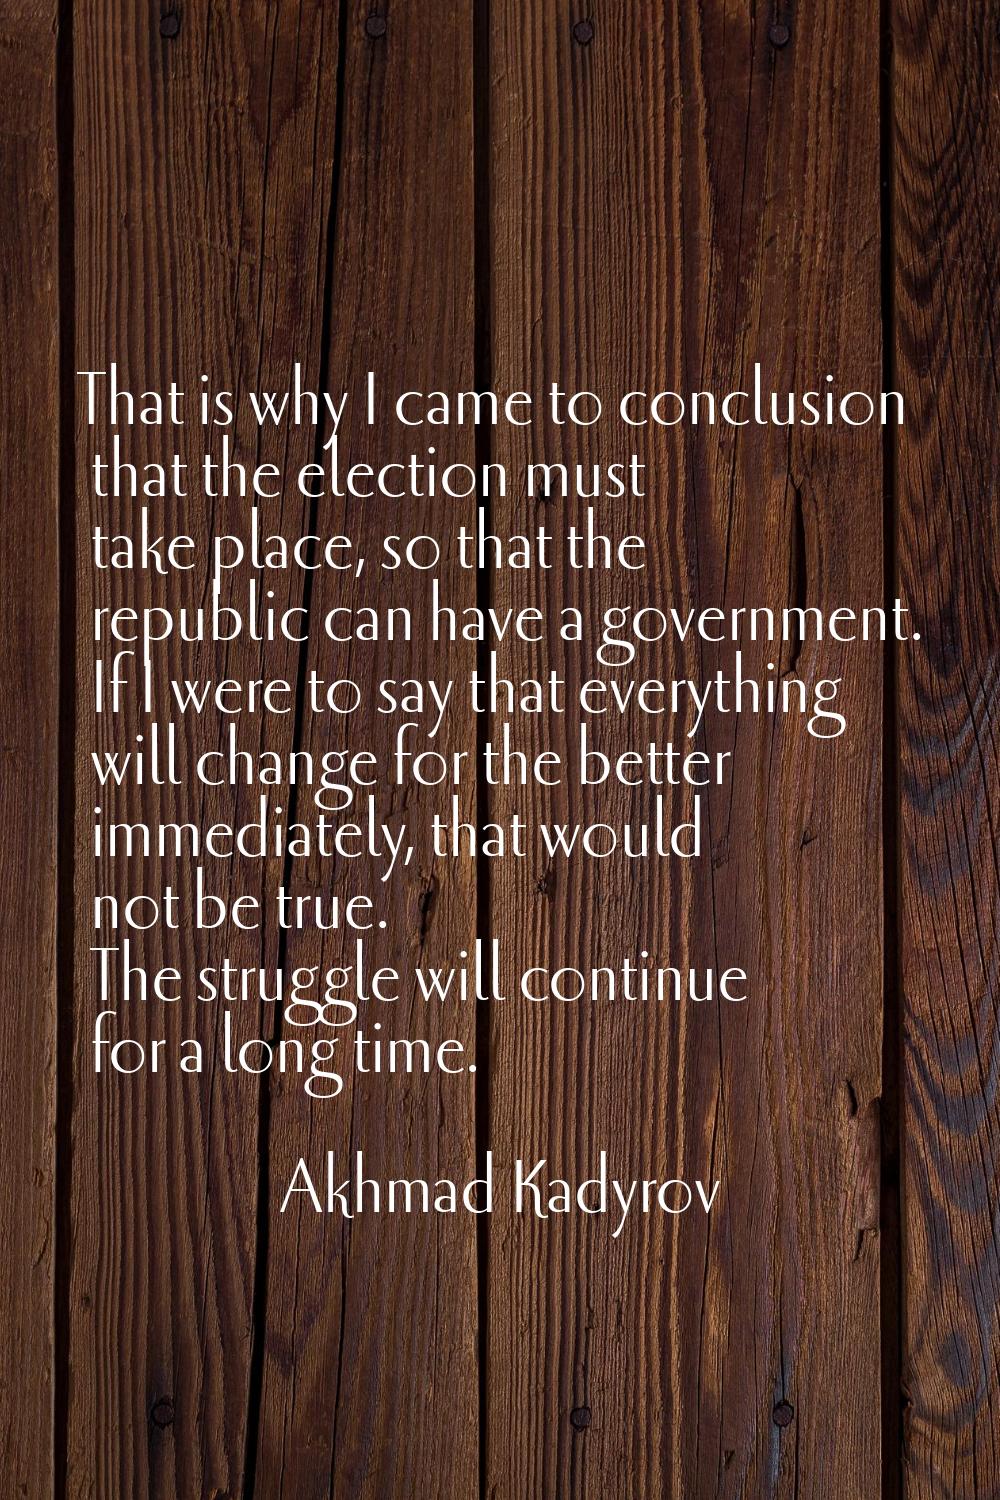 That is why I came to conclusion that the election must take place, so that the republic can have a